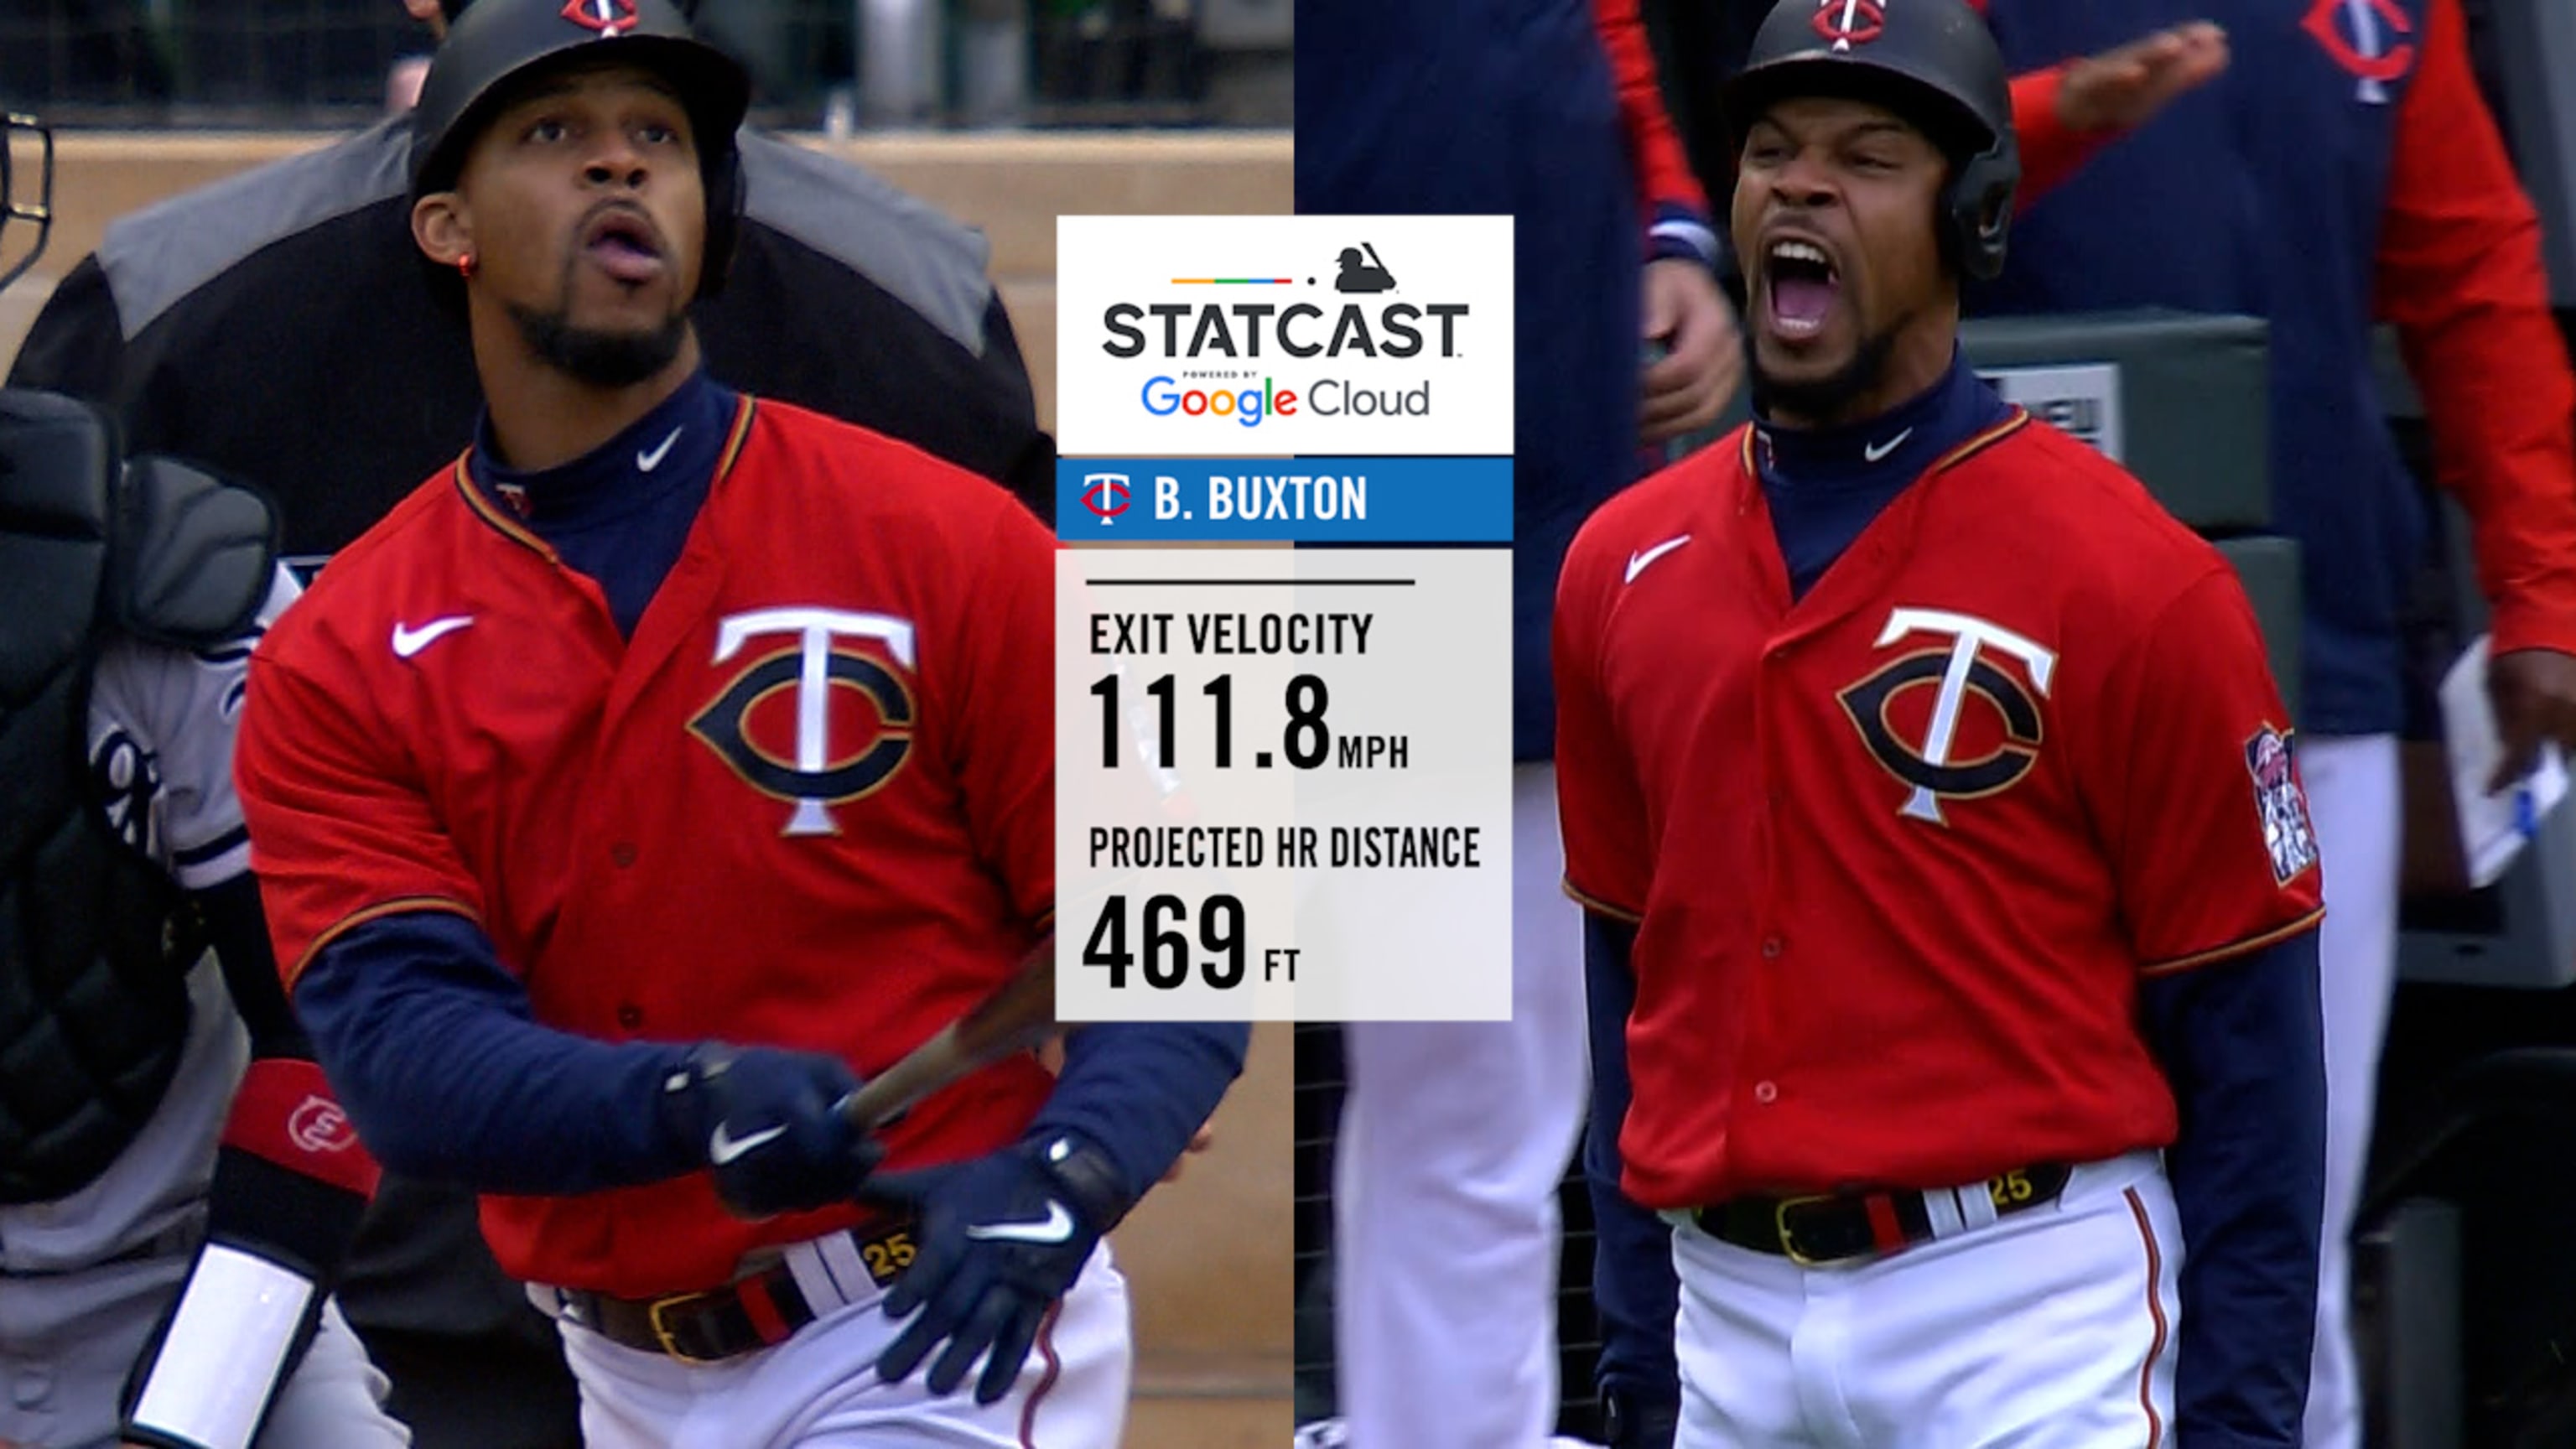 Byron Buxton homers in his first 2 at-bats as the Twins beat Lance